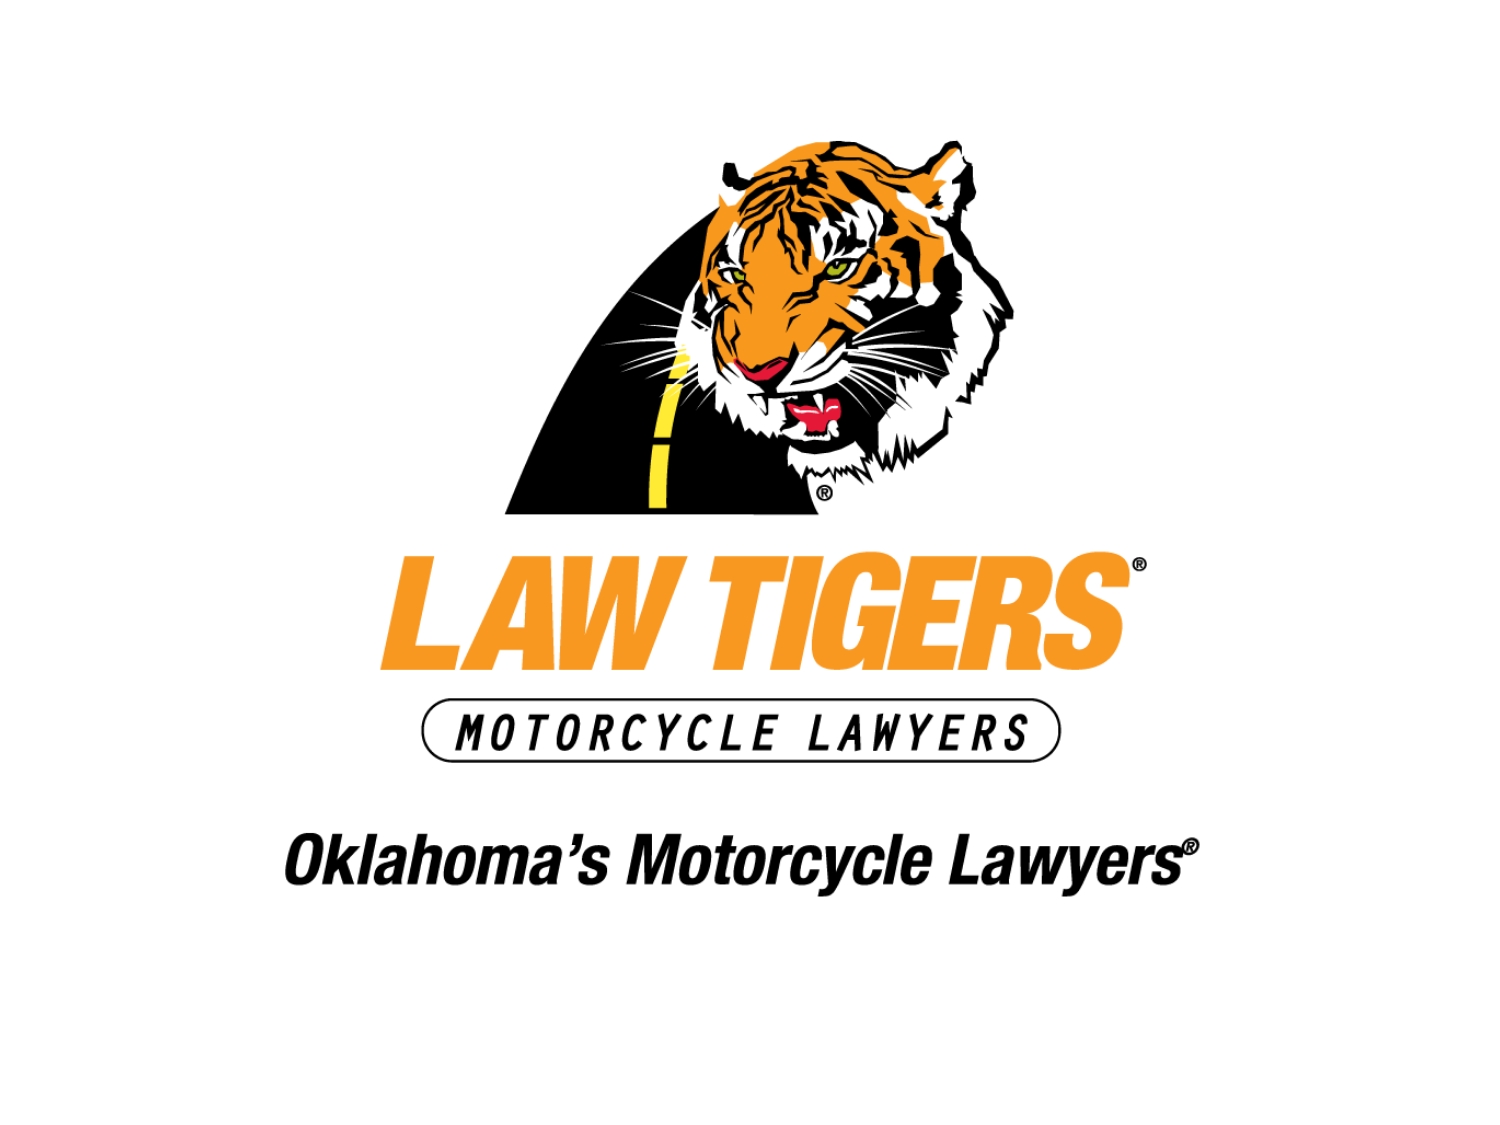 Law Tigers Oklahoma is excited to be the exclusive Motorcycle Injury Lawyers